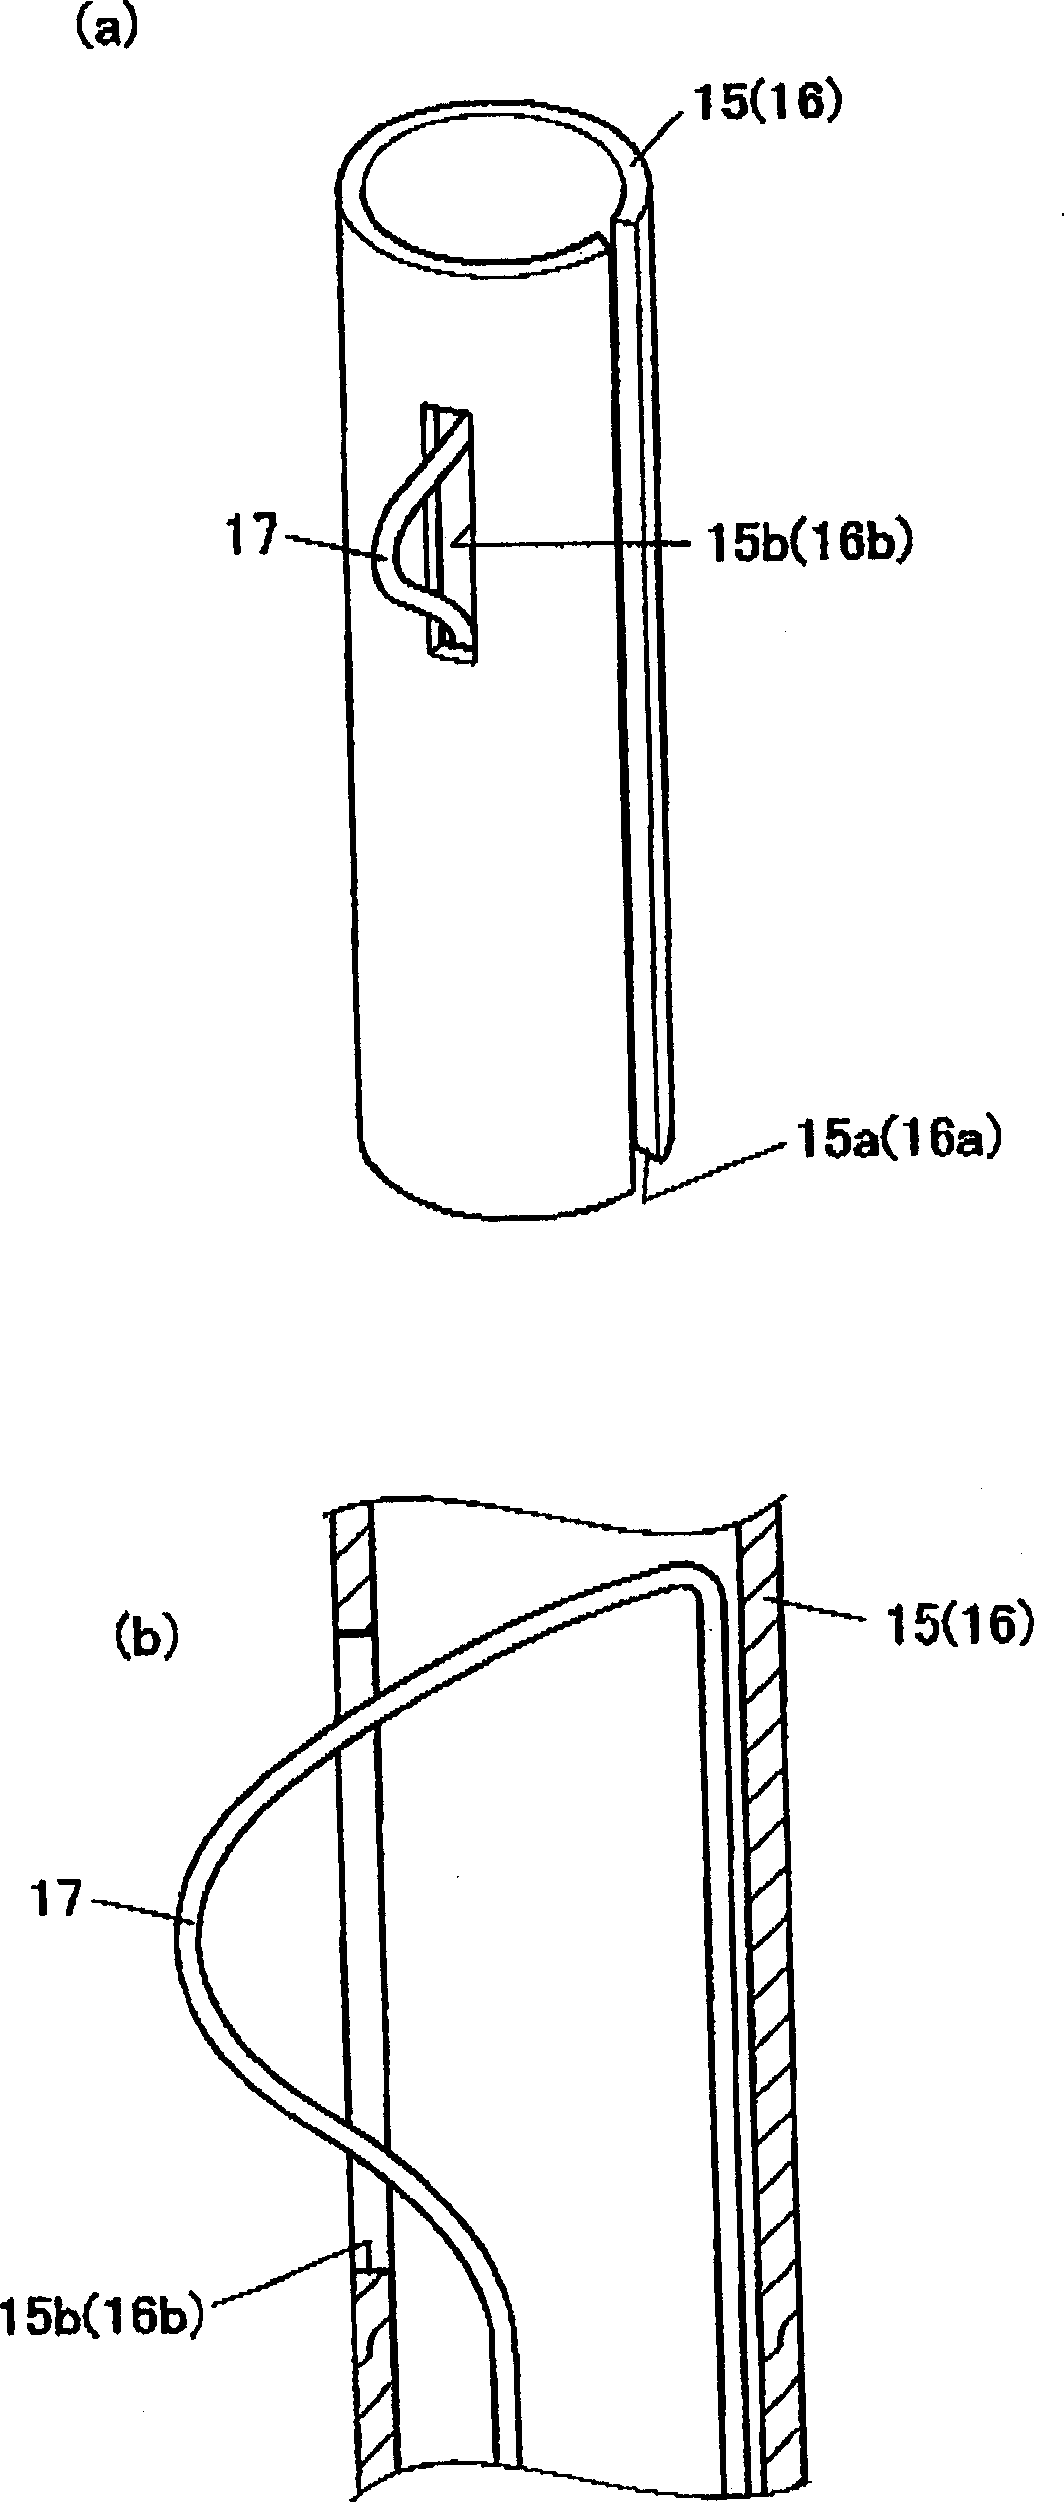 Button conveying device